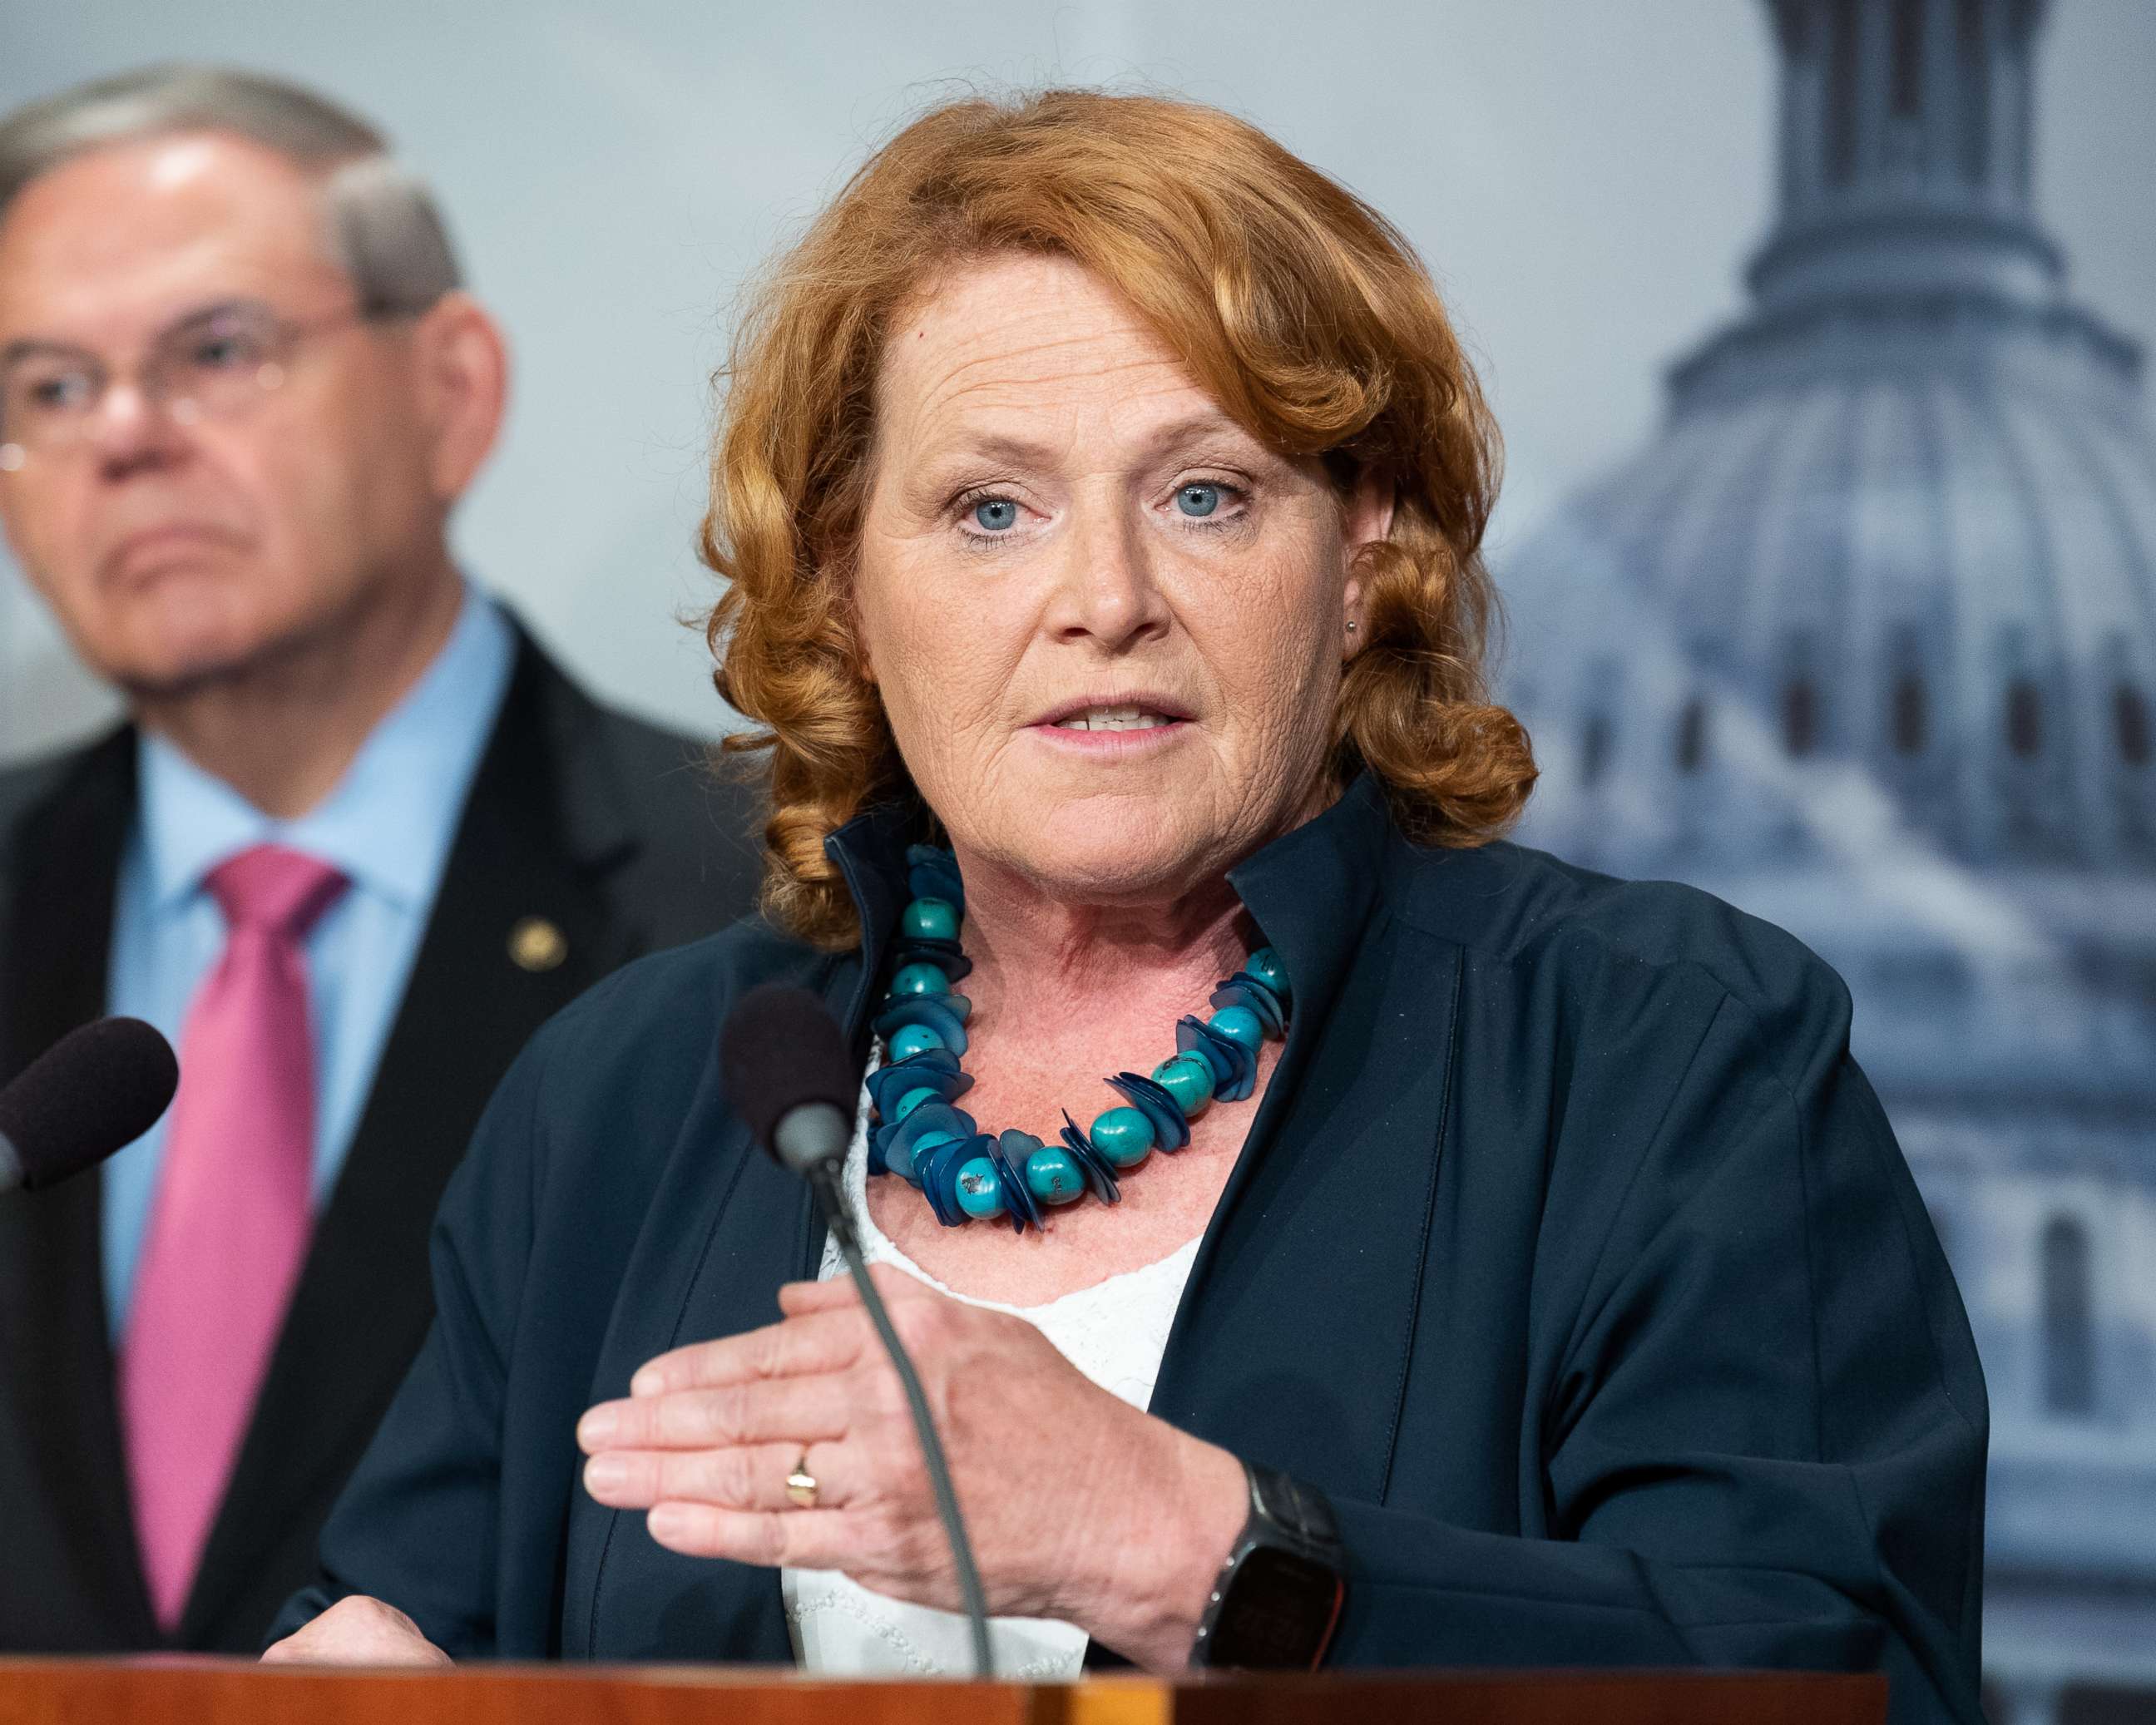 PHOTO: Sen. Heidi Heitkamp speaks at a press conference about the proposed Central American Reform And Enforcement Act in the US Capitol.